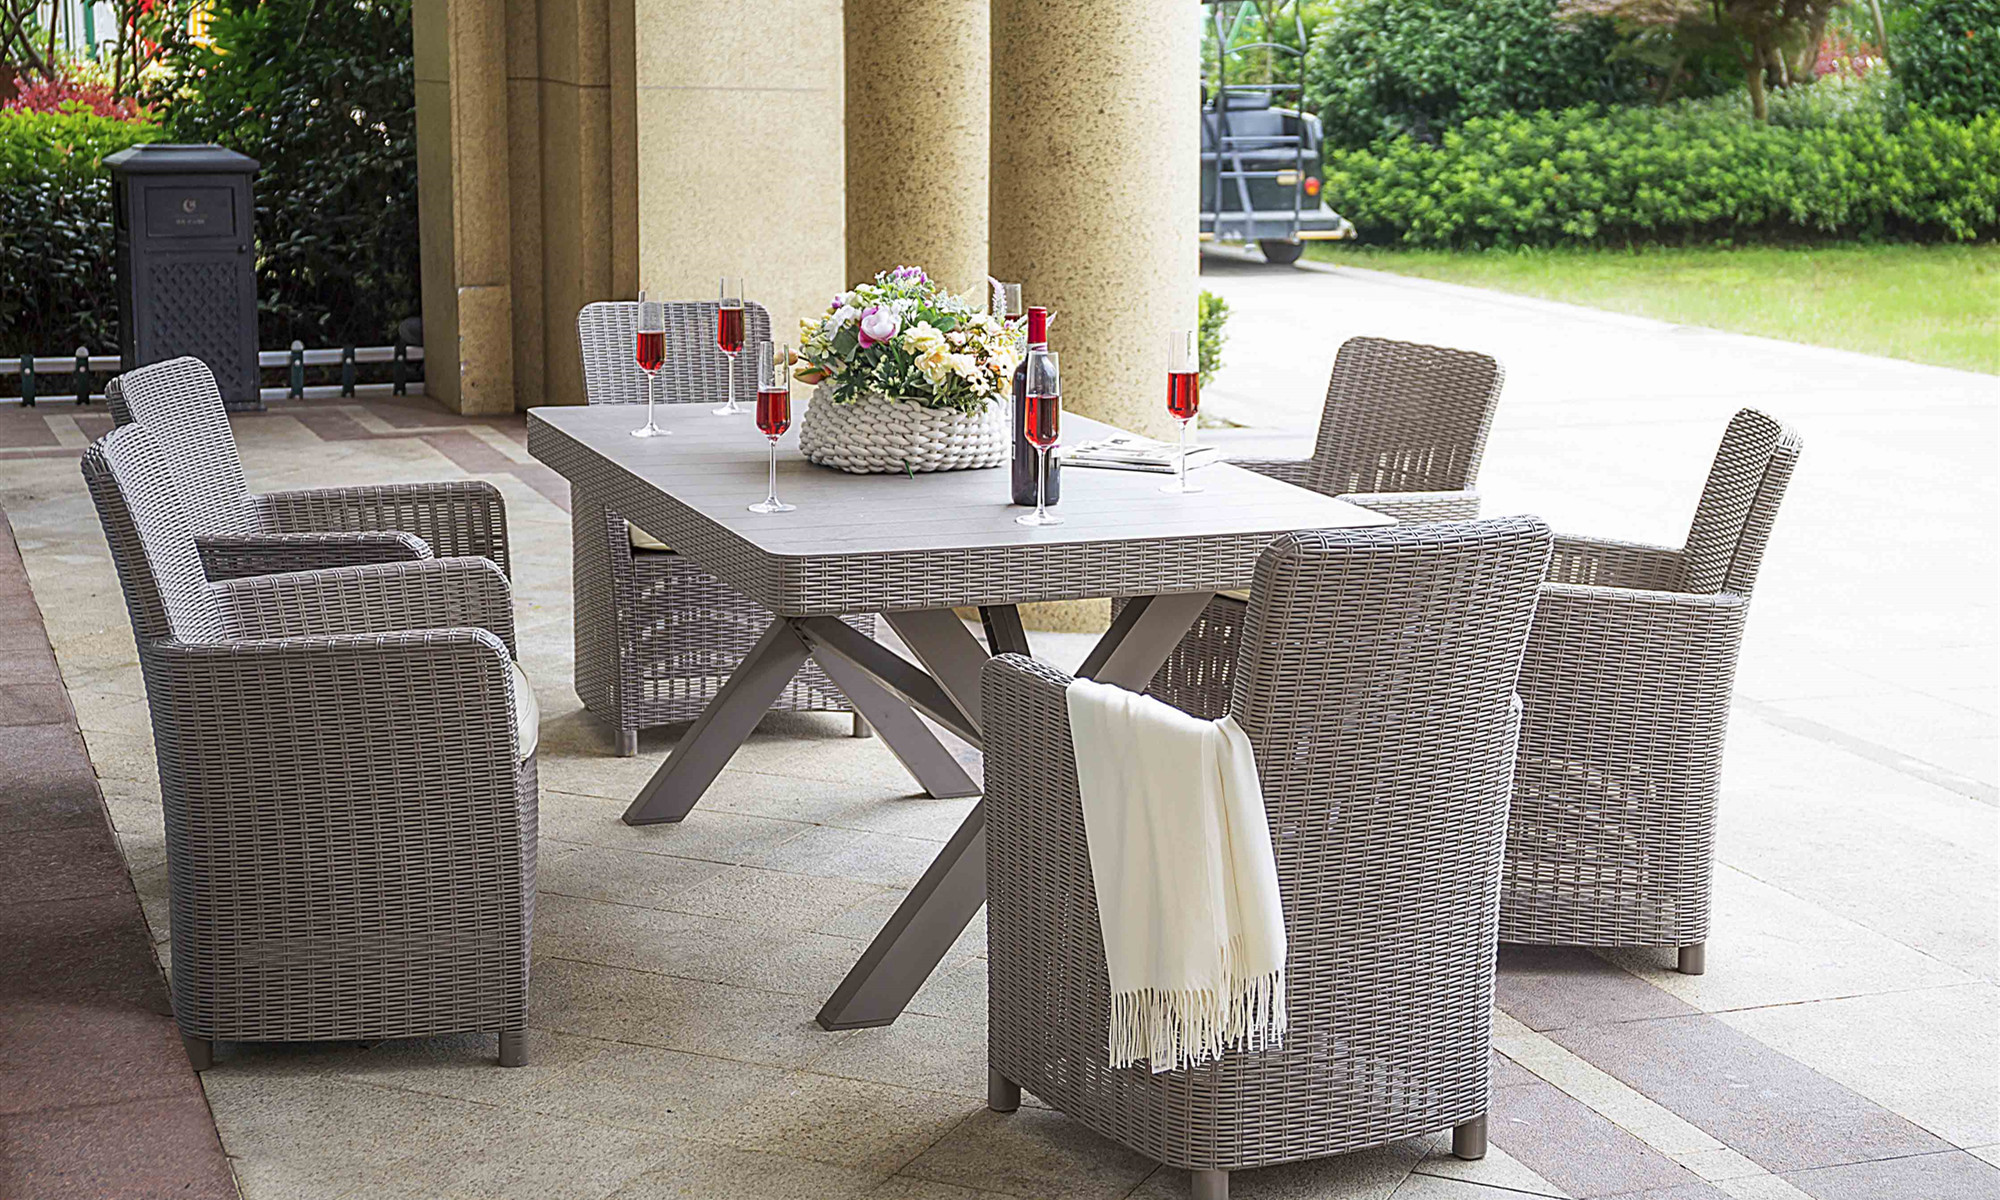 MD-081&MD-085 / 6 Seat Rectangle - Wicker Dining Set - Eton Chair 